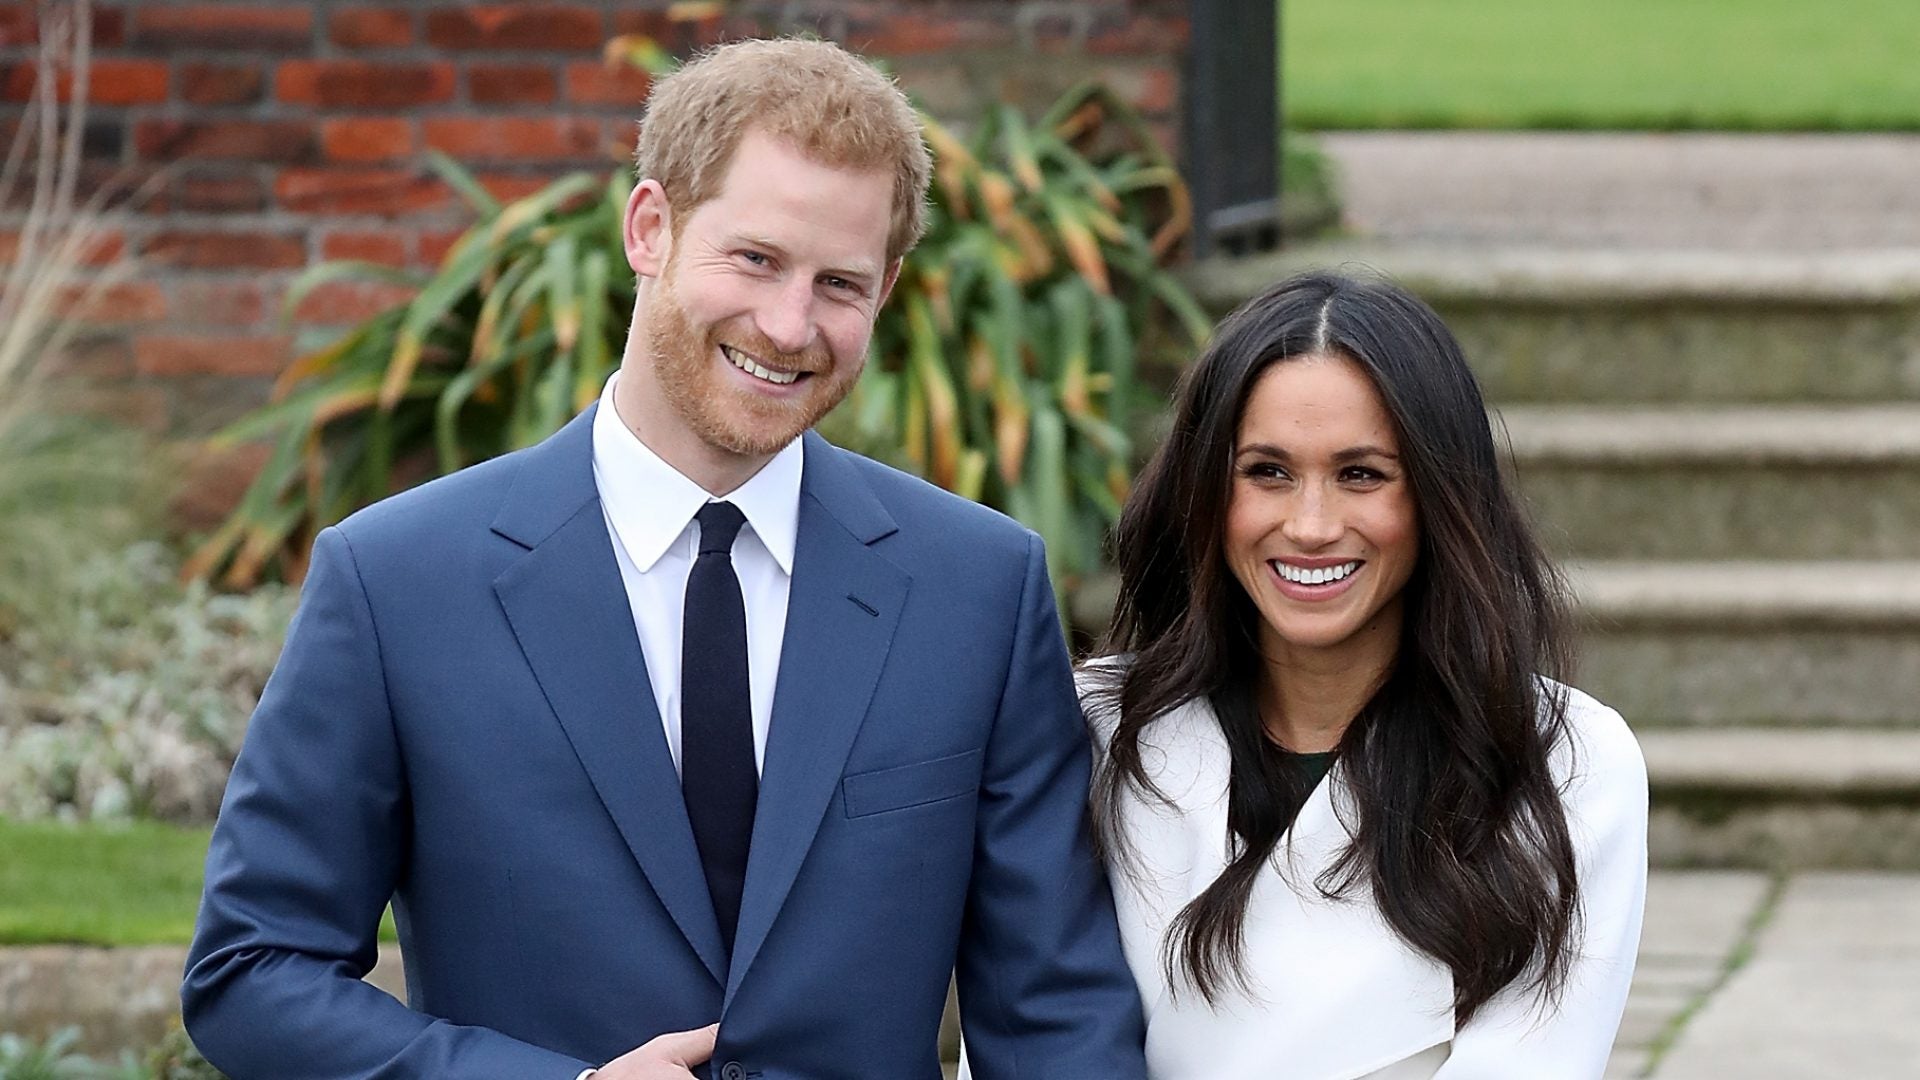 Opinion: Prince Harry And Meghan Markle Deserve A Fairytale Ending Where They Are Celebrated, Not Tolerated